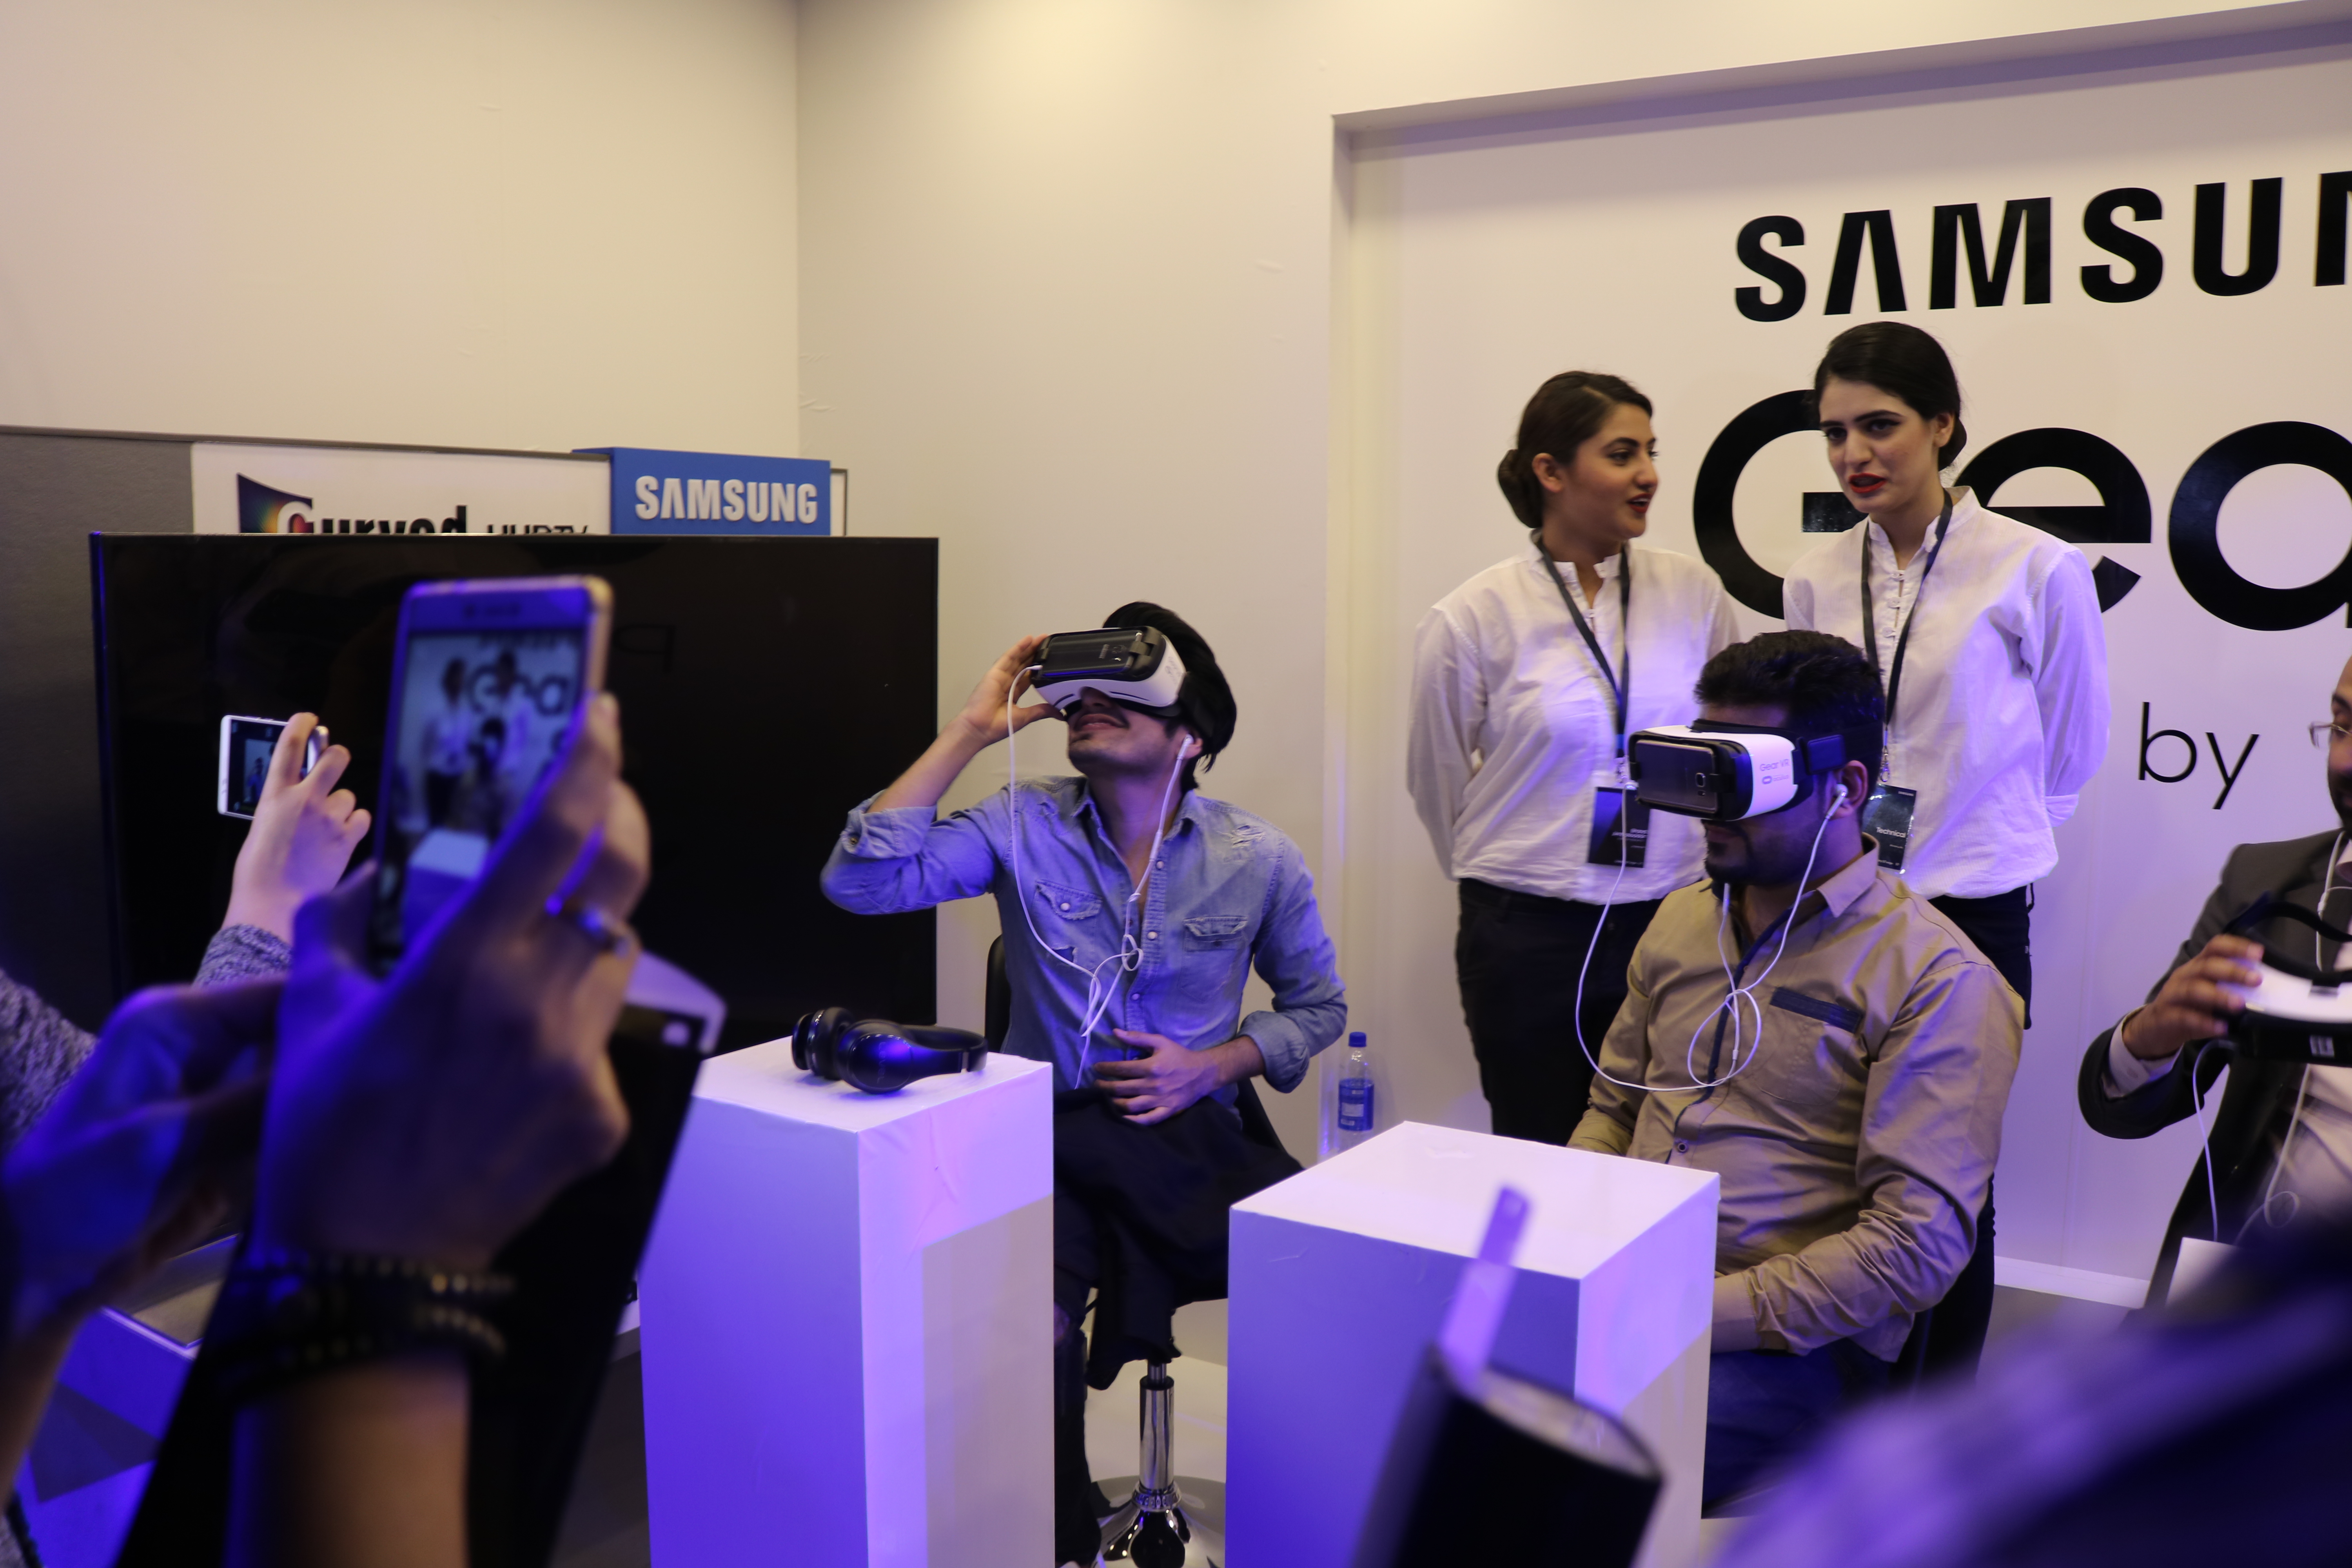 Samsung Organizes Launch Event of Samsung Galaxy S7 & S7 Edge at CineStar IMAX Lahore